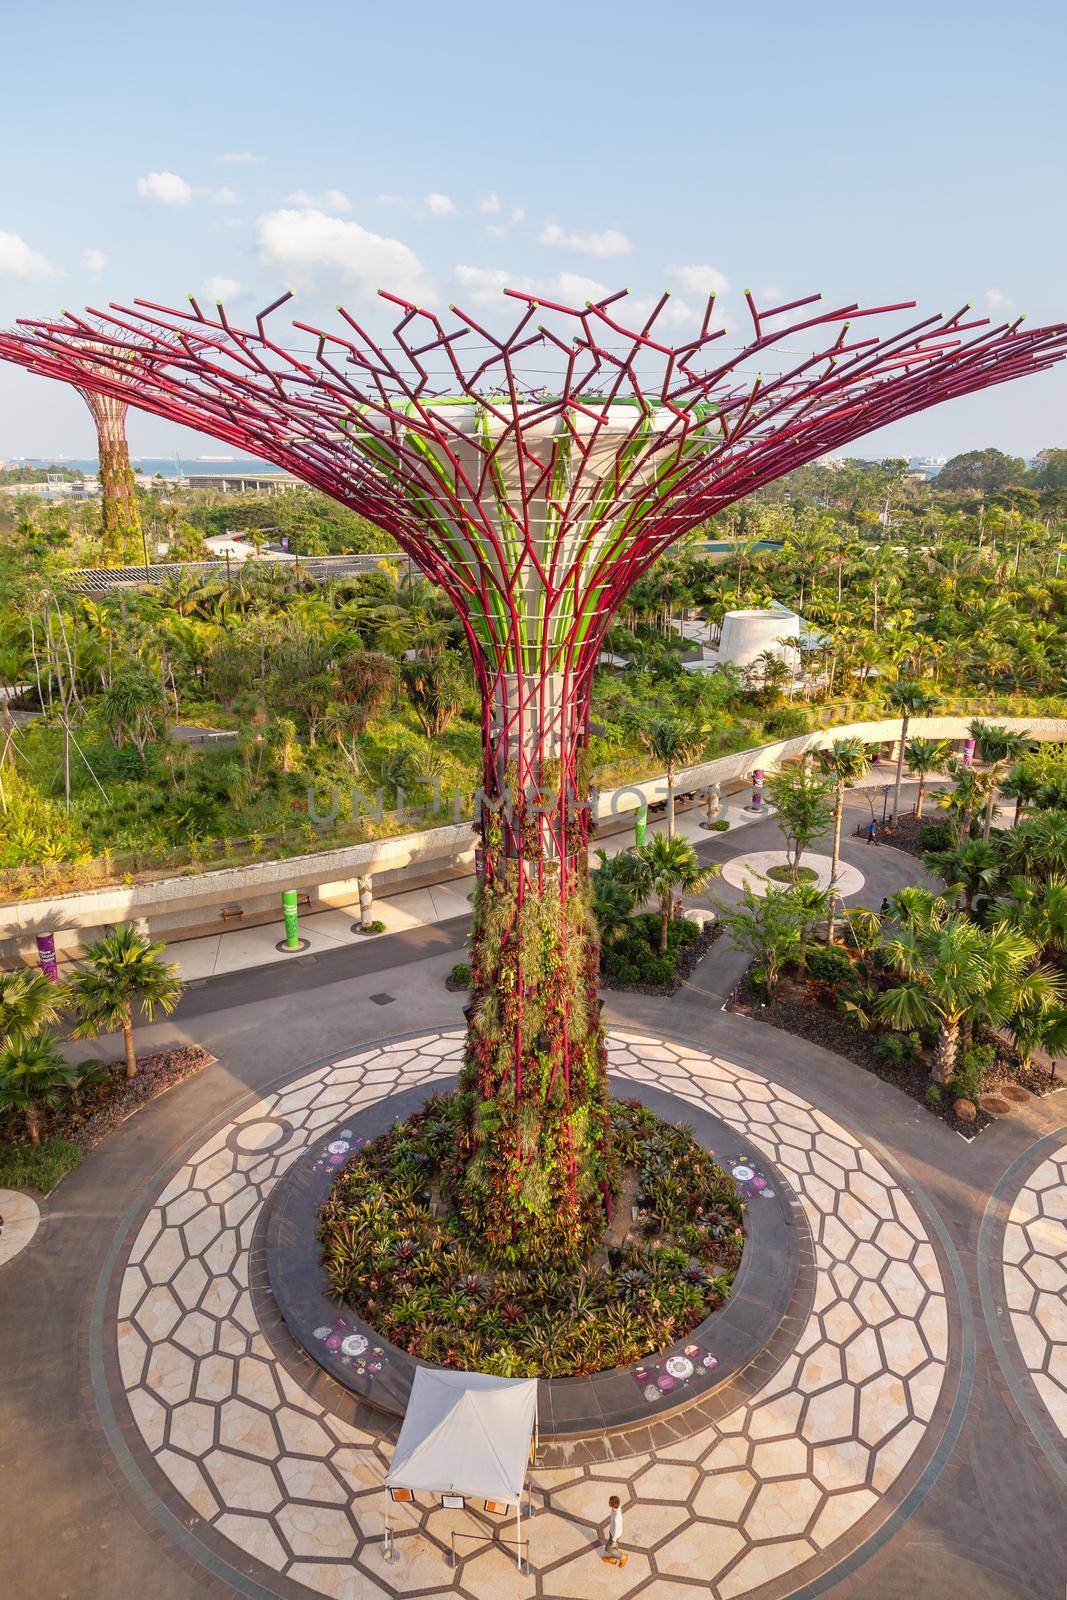 SINGAPORE, SINGAPORE - January 17, 2013. Decorative tower in shape of trees with foliage. Different flower beds with plants. Supertree Grove at Gardens by the Bay near Marina Bay Sands hotel. by aksenovko